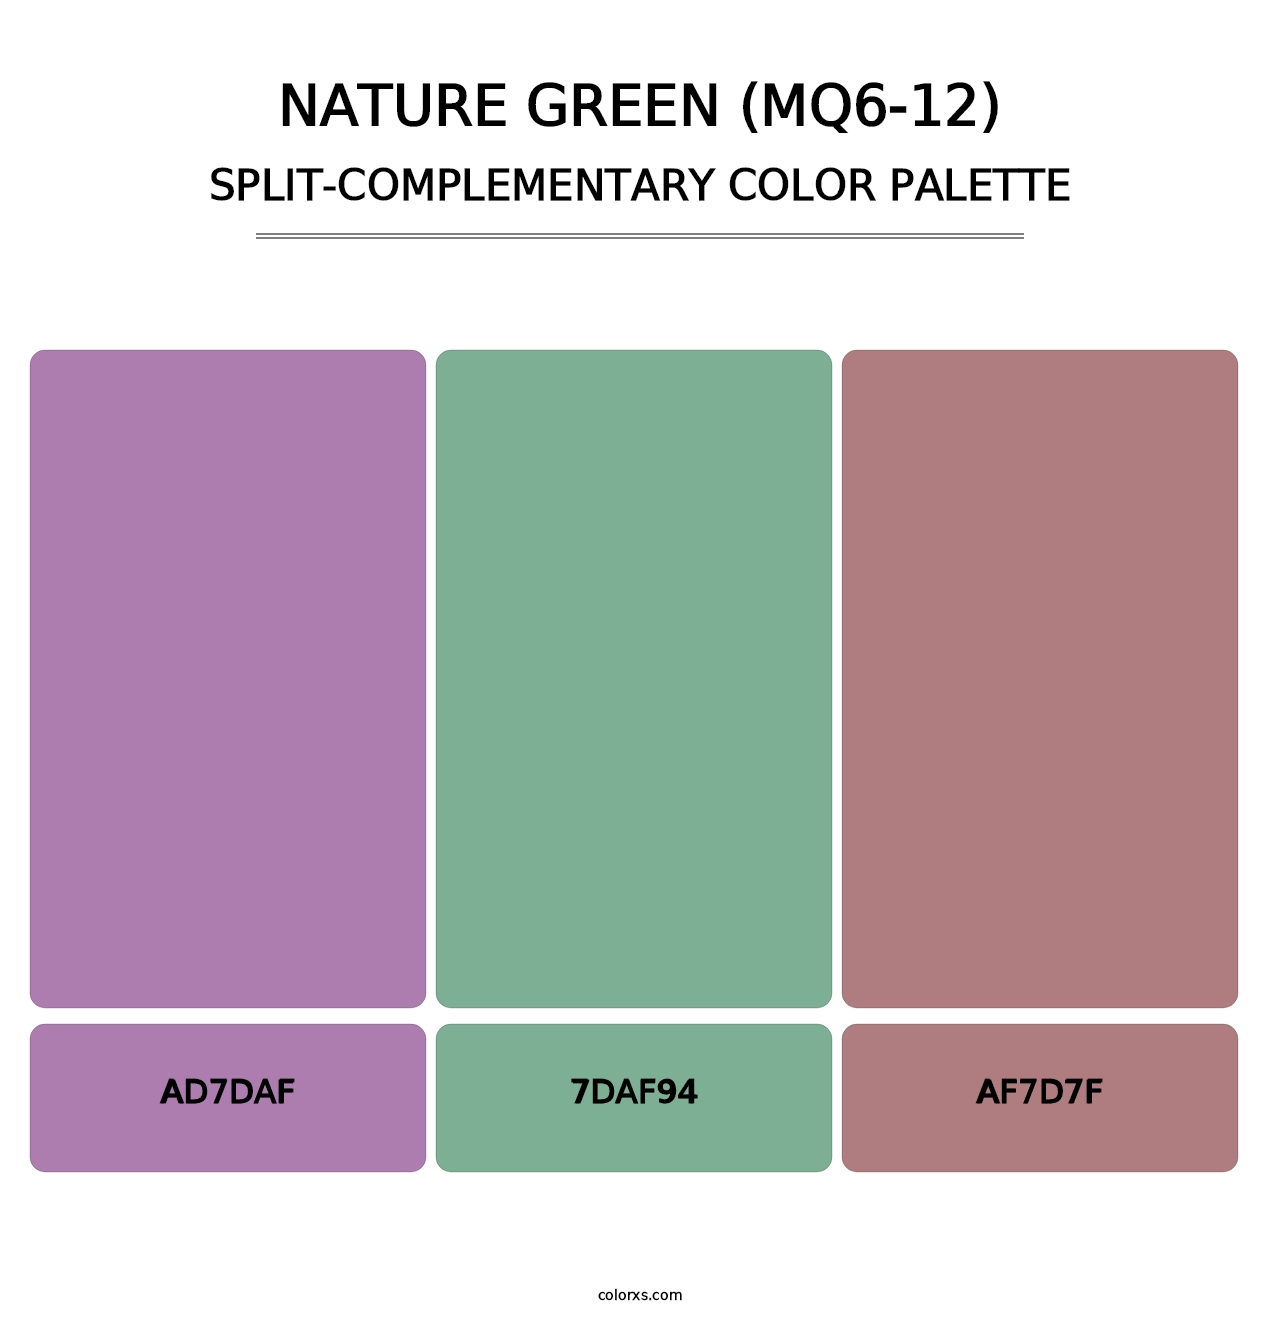 Nature Green (MQ6-12) - Split-Complementary Color Palette